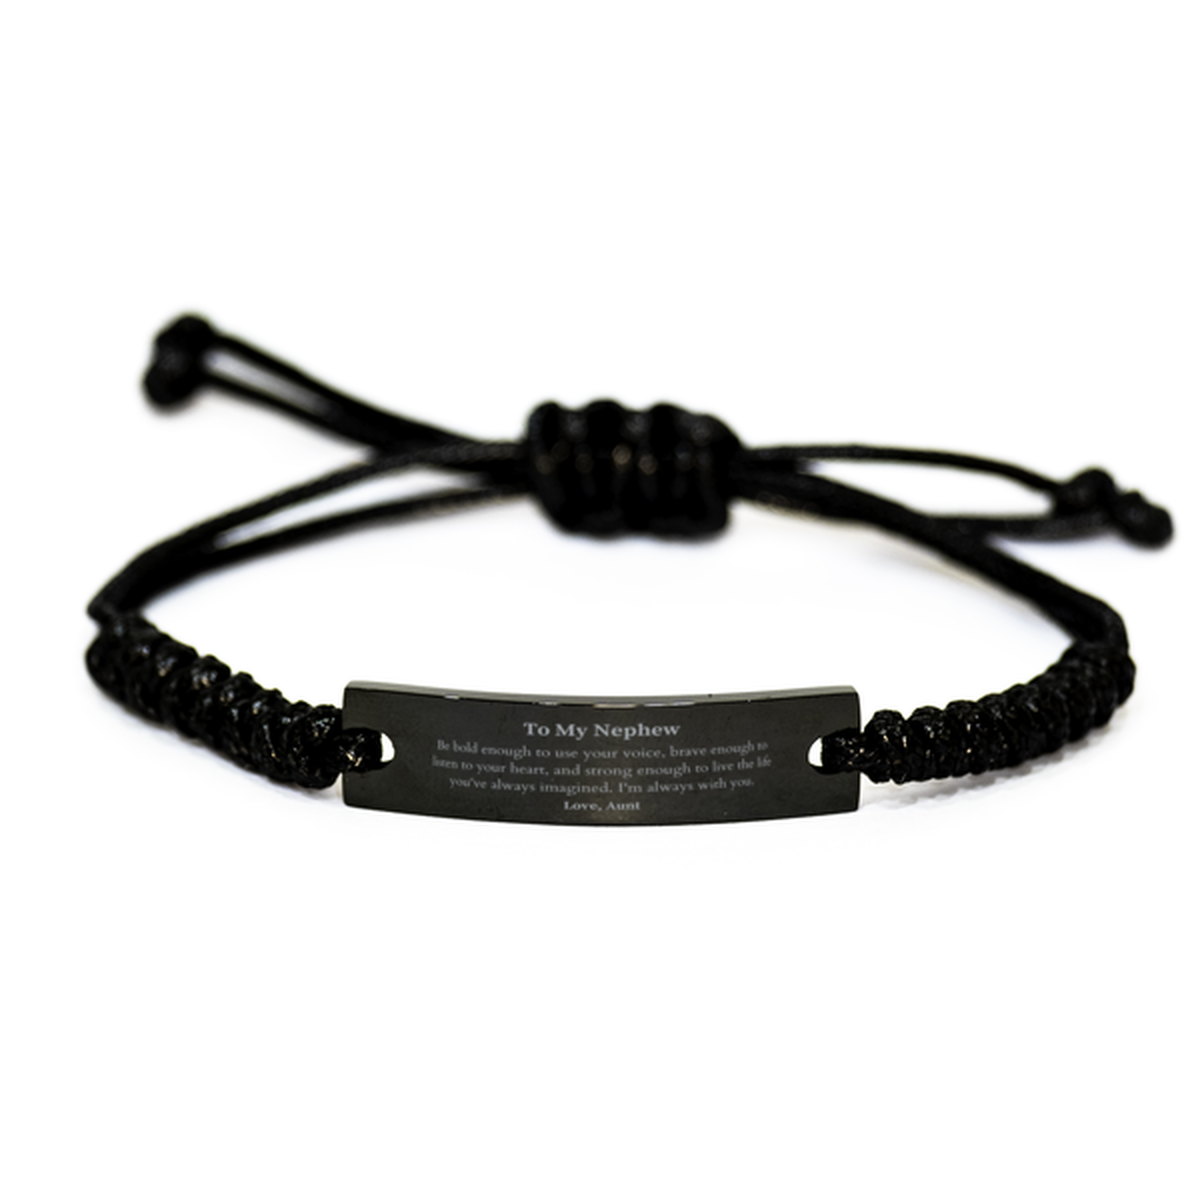 Keepsake Nephew Black Rope Bracelet Gift Idea Graduation Christmas Birthday Nephew from Aunt, Nephew Be bold enough to use your voice, brave enough to listen to your heart. Love, Aunt